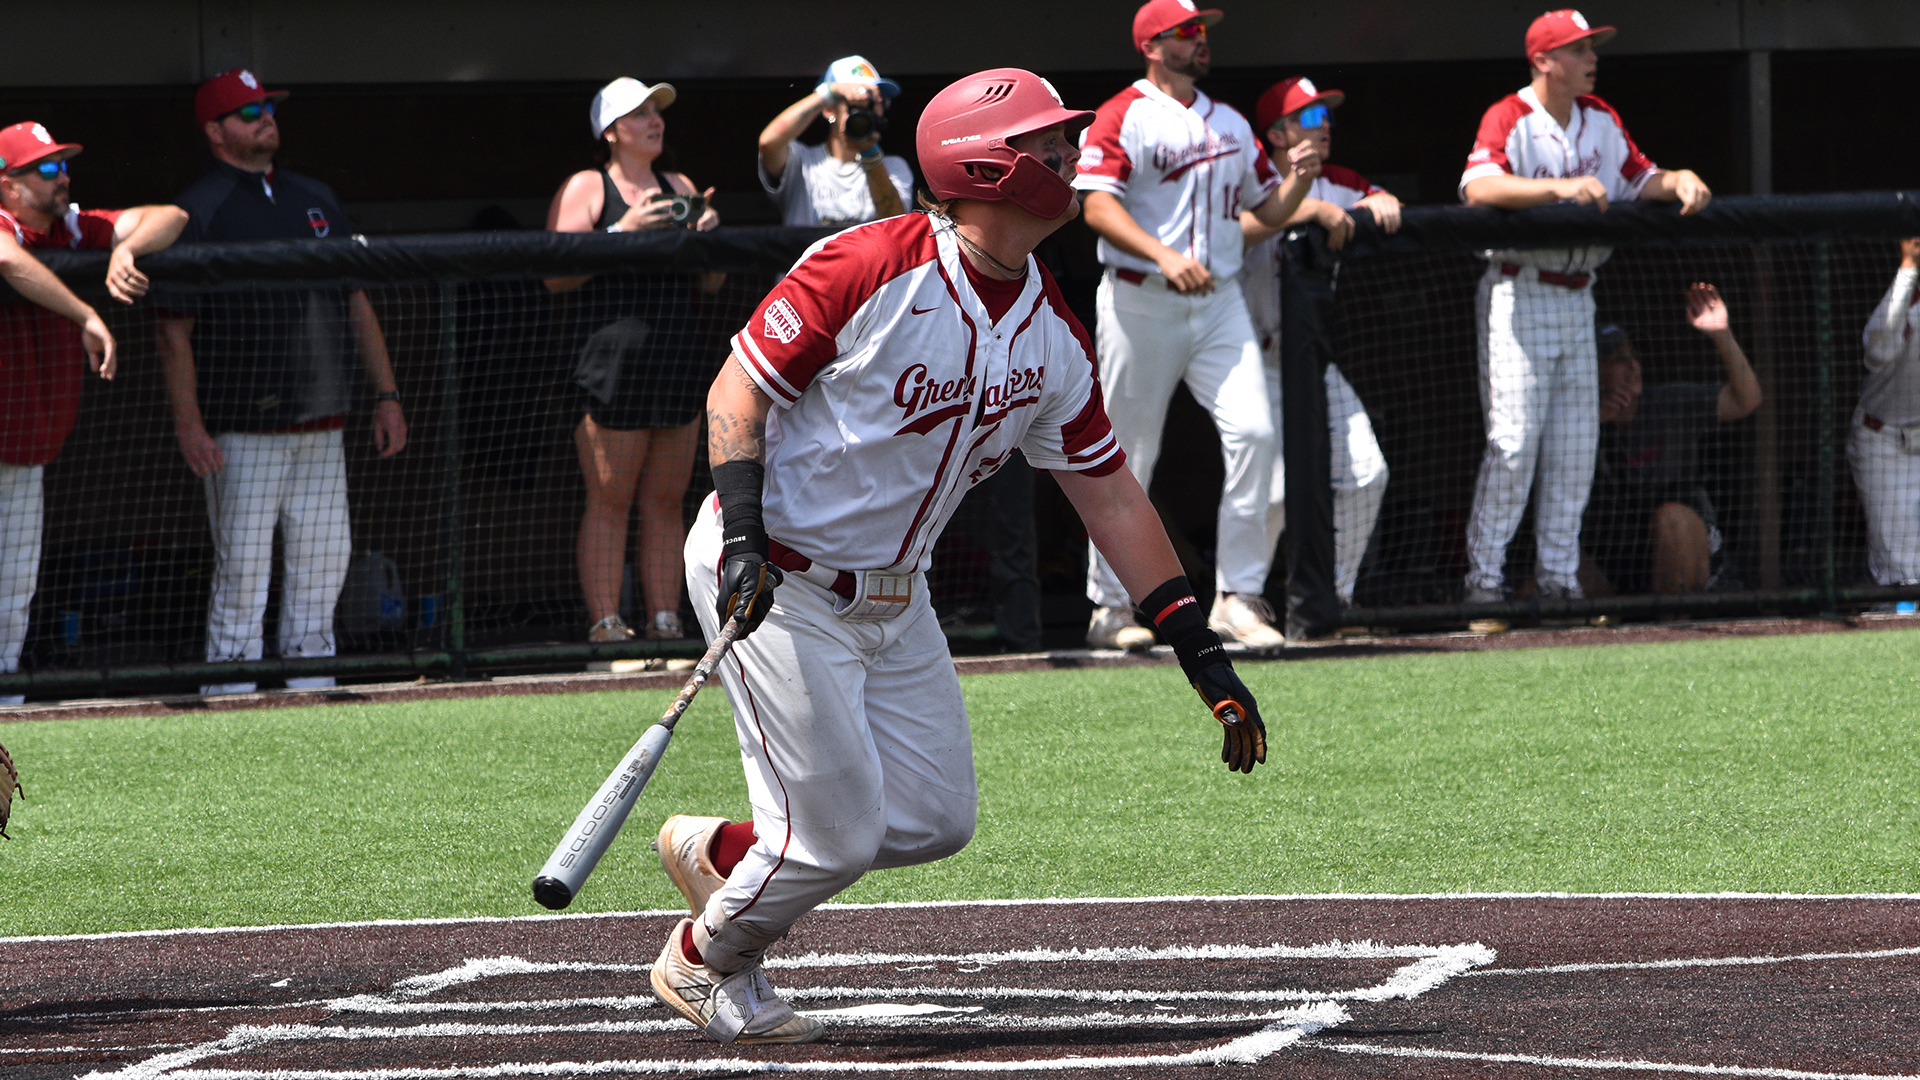 Trevor Goodwin hit the game-winning solo home run in the bottom of the eighth to lift IU Southeast to a 3-2 victory over Taylor in the Upland Bracket on Wednesday.